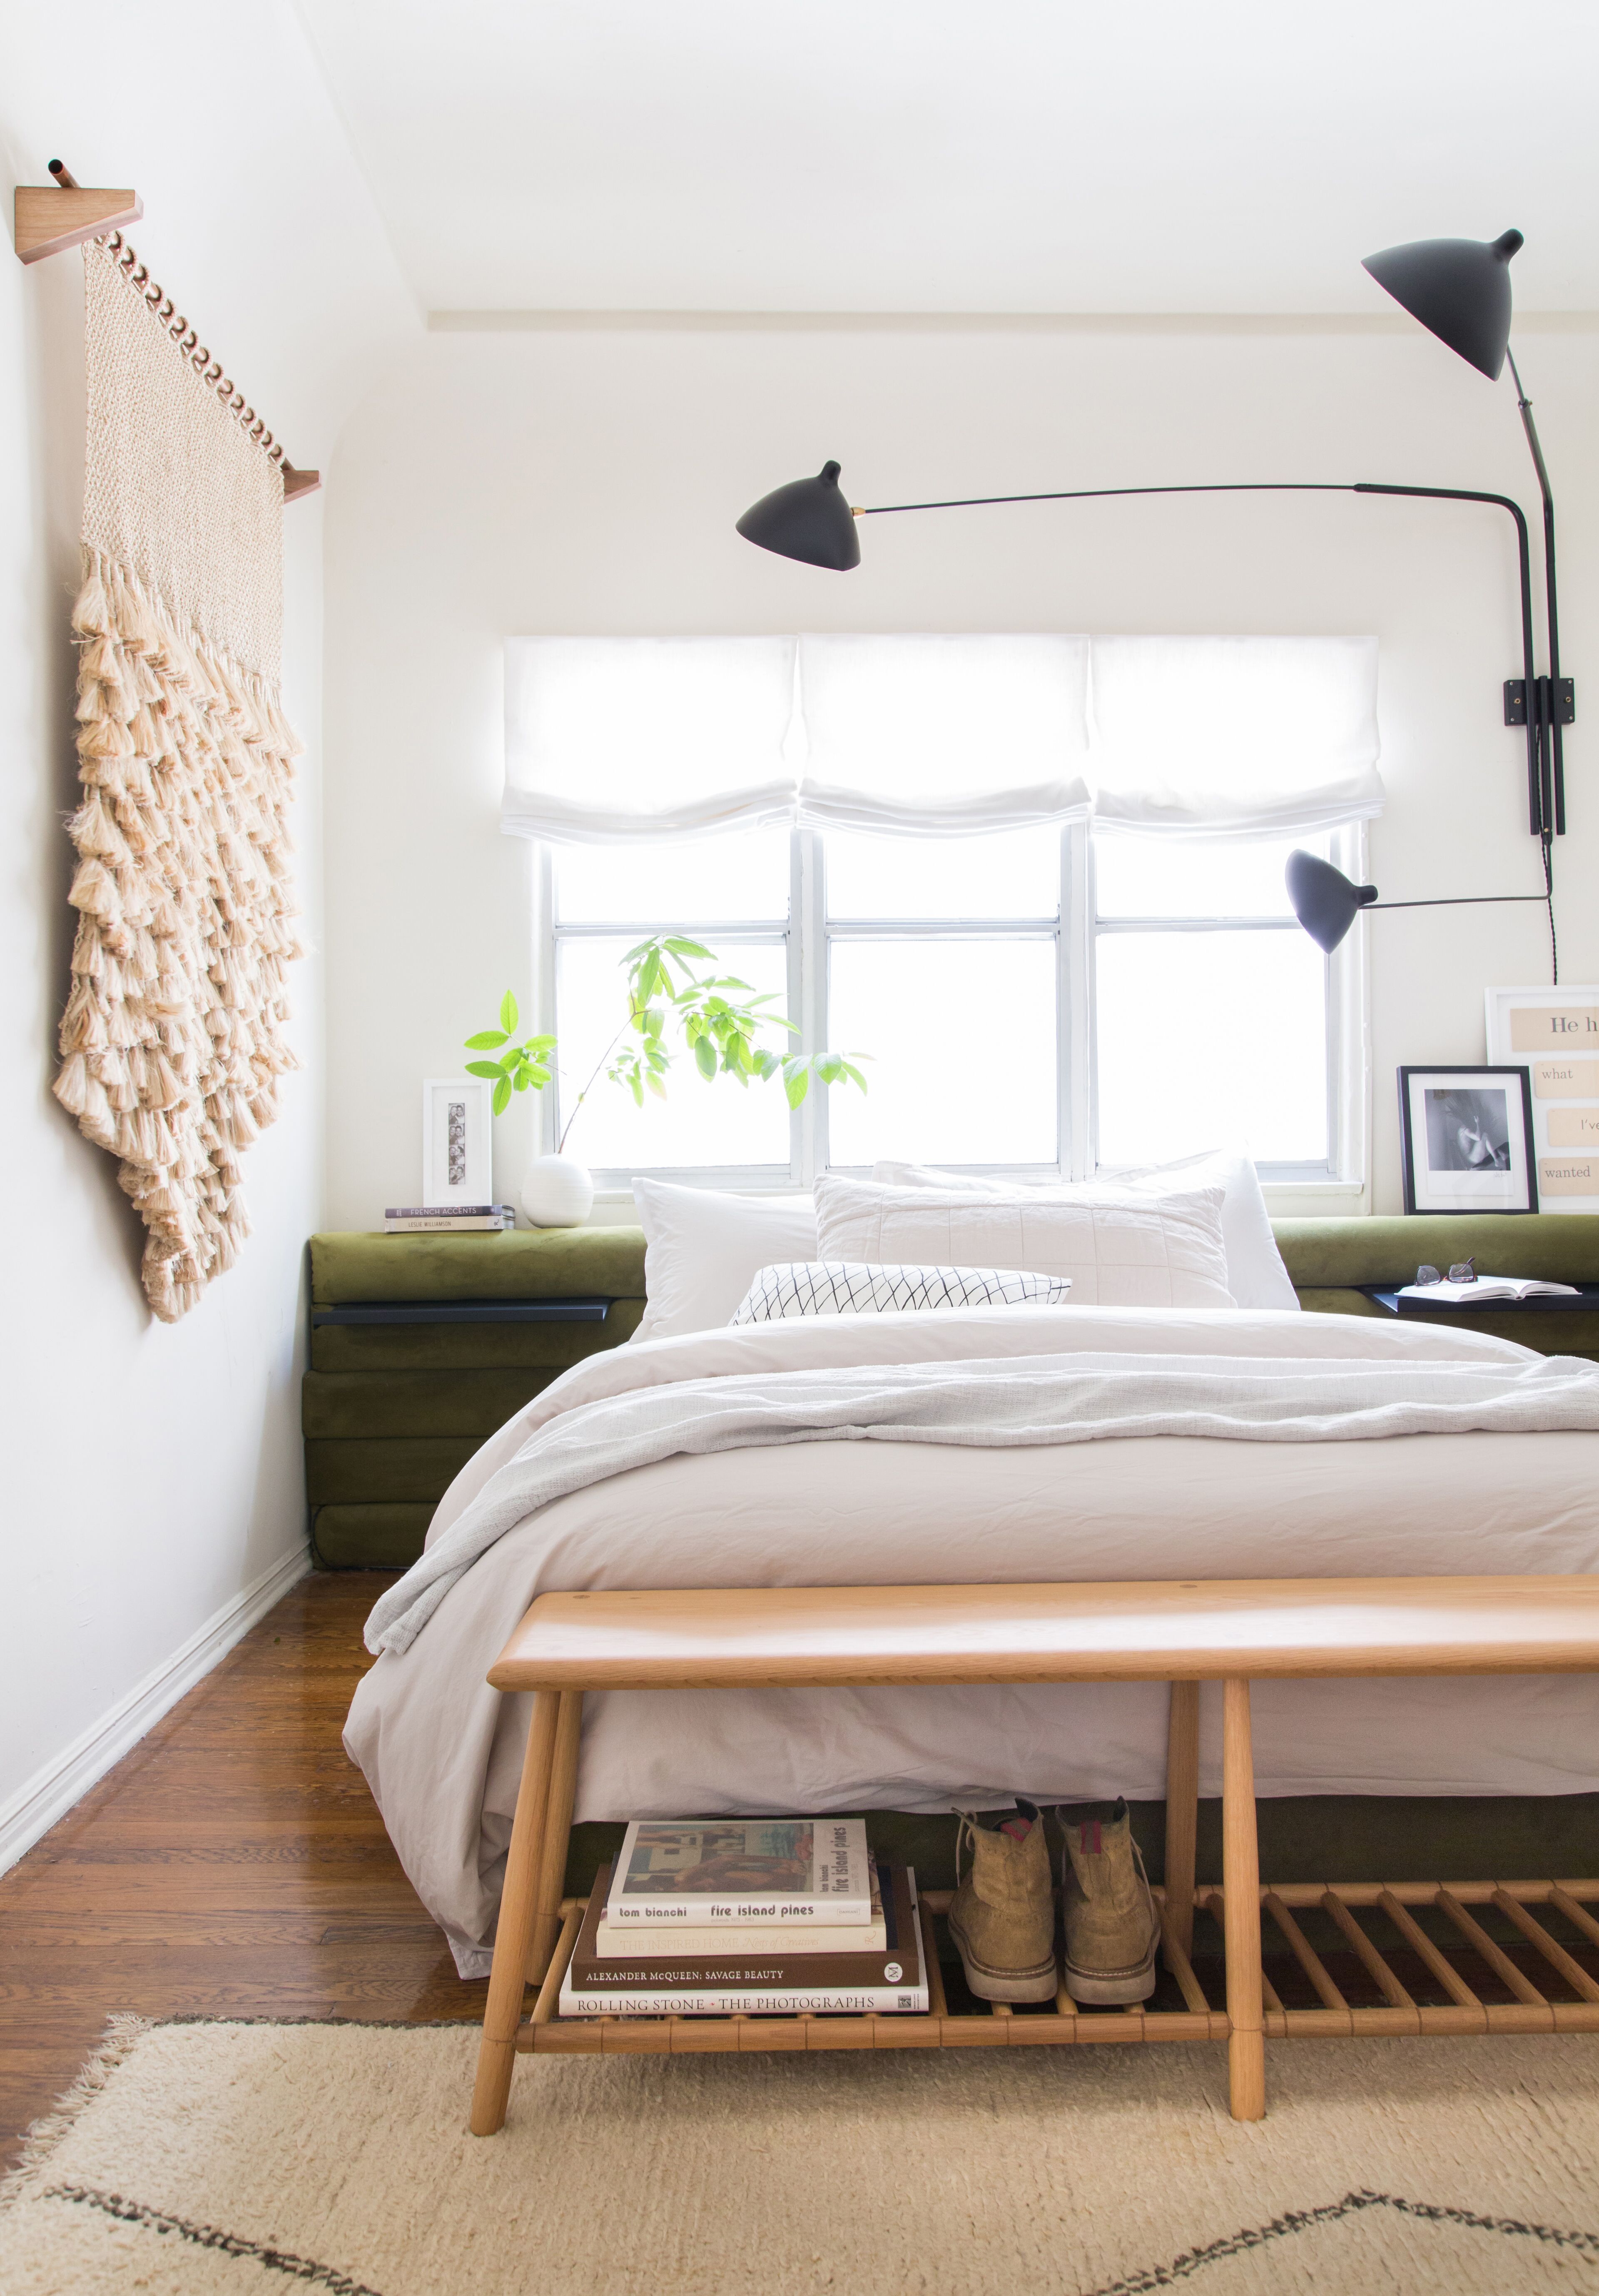 The Best Small-Space Decorating Ideas We've Seen at Apartment